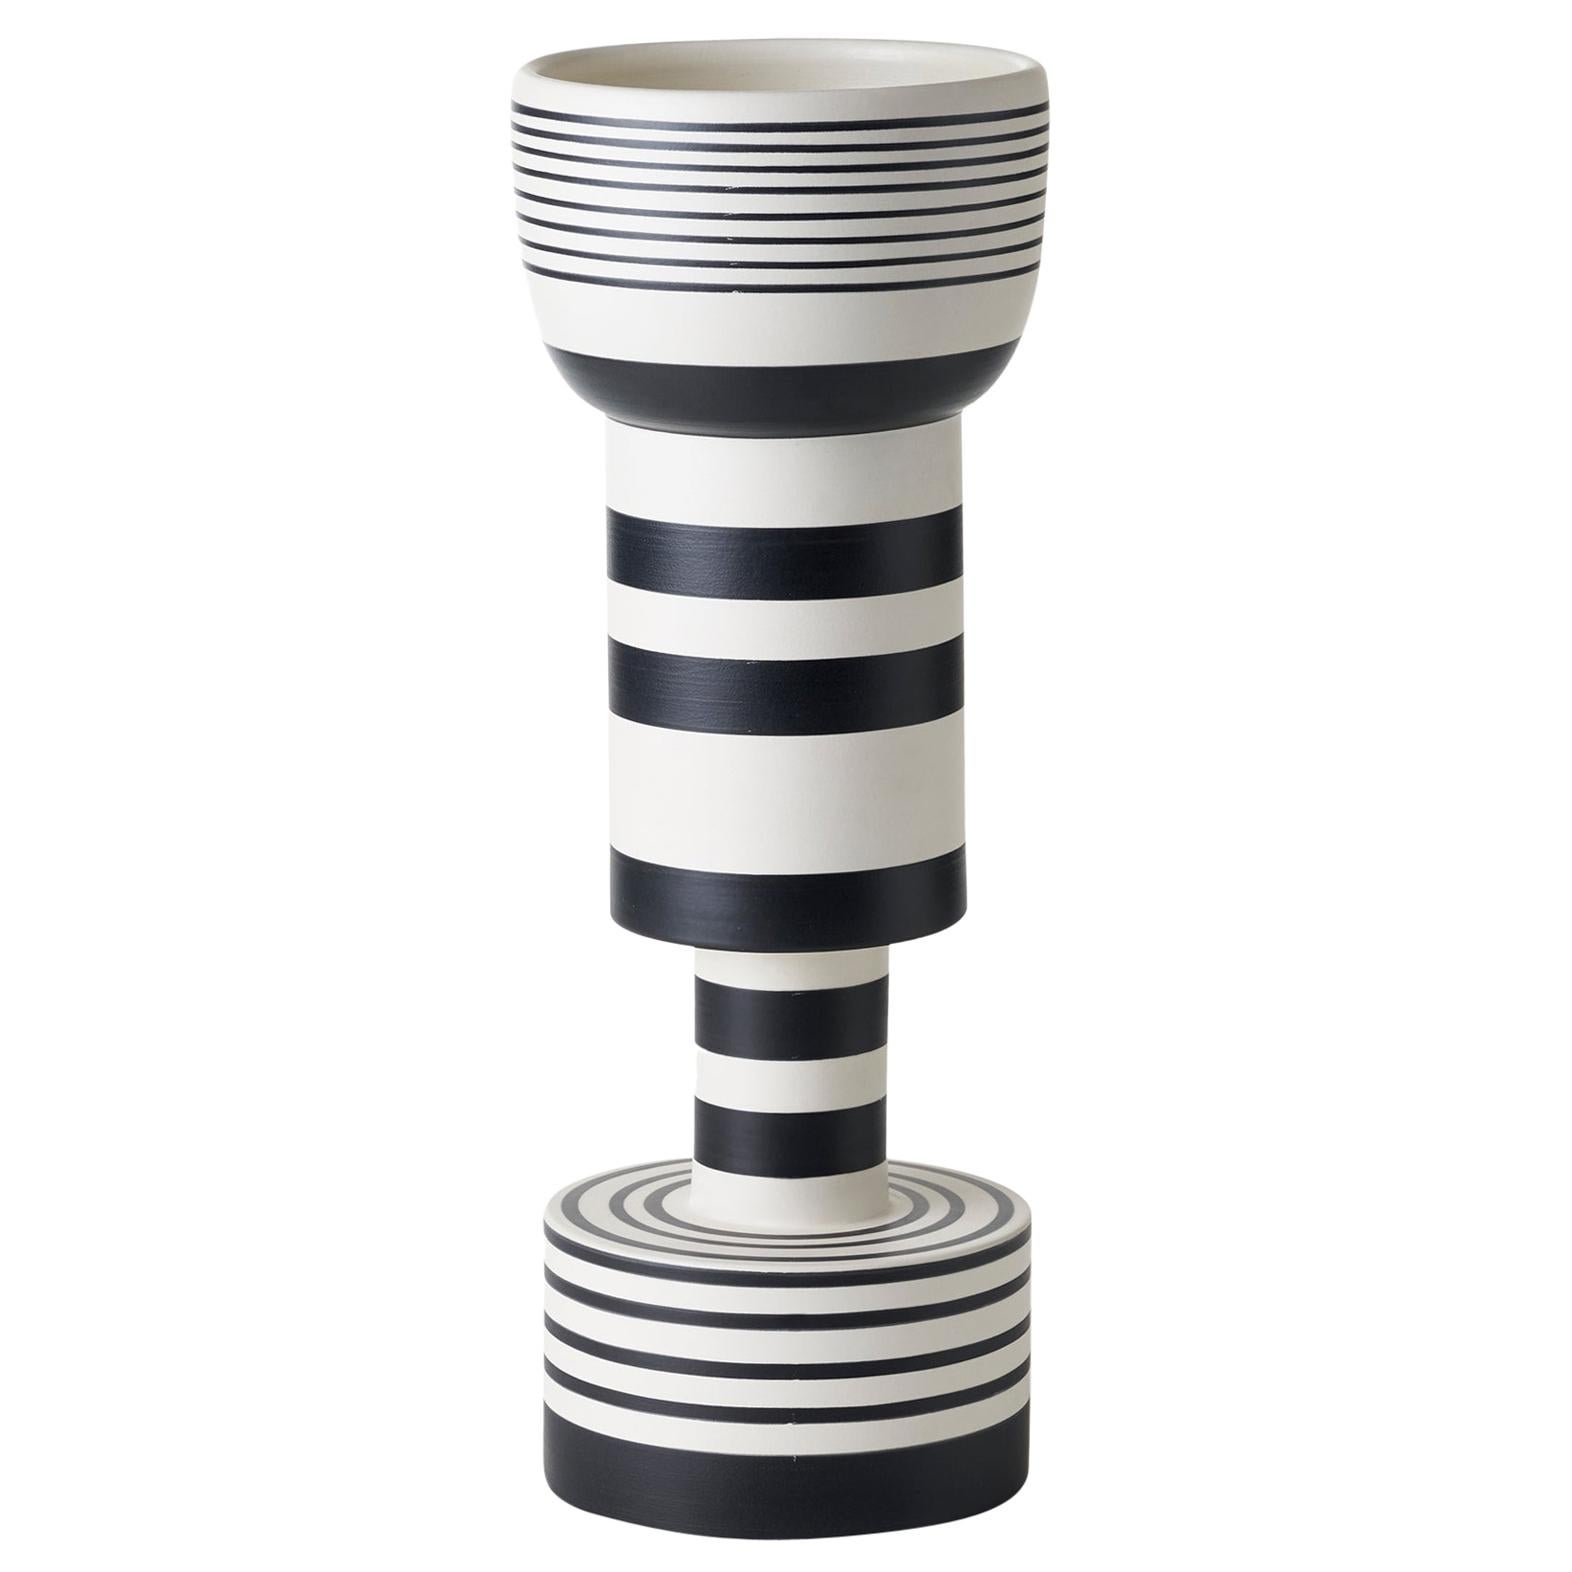 Code: ZZ66A502, Designer: Ettore Sottsass, Made in Italy, Material: Ceramic For Sale